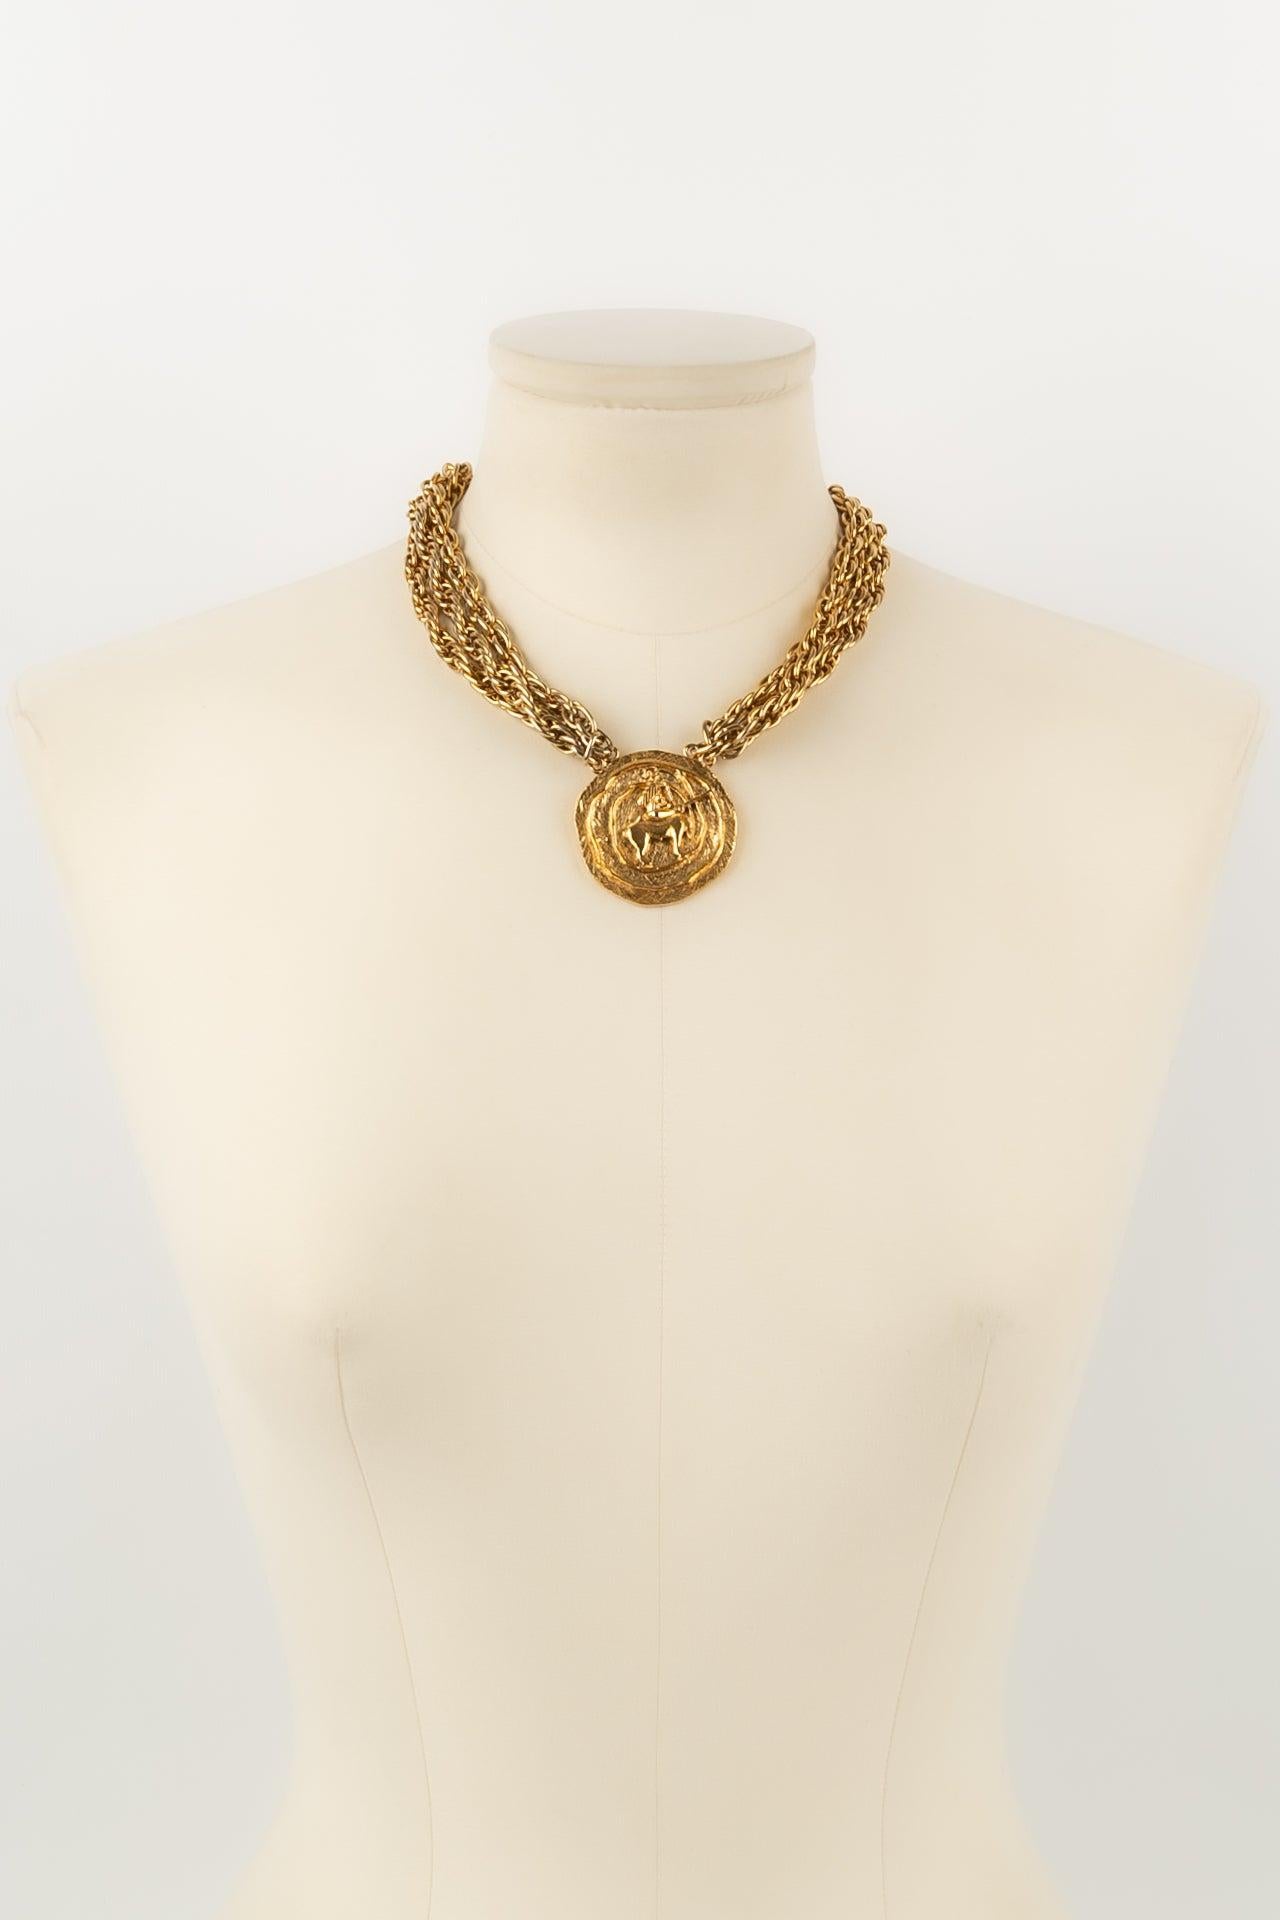 Chanel Multi Chain Necklace in Gold Metal and Engraved Medallion In Excellent Condition For Sale In SAINT-OUEN-SUR-SEINE, FR